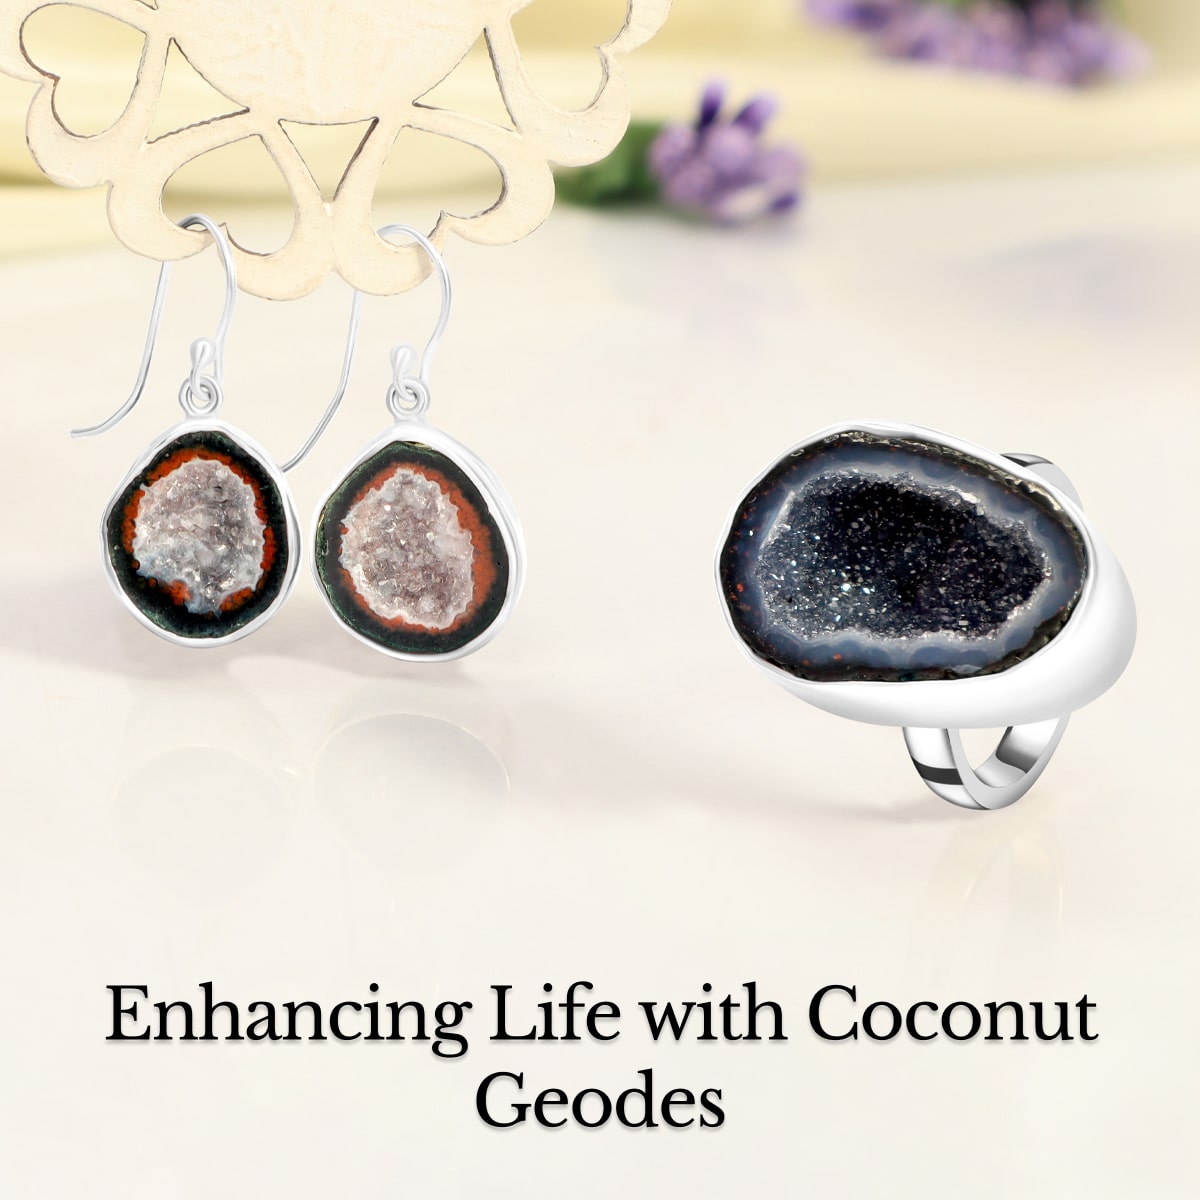 How to Use Coconut Geodes